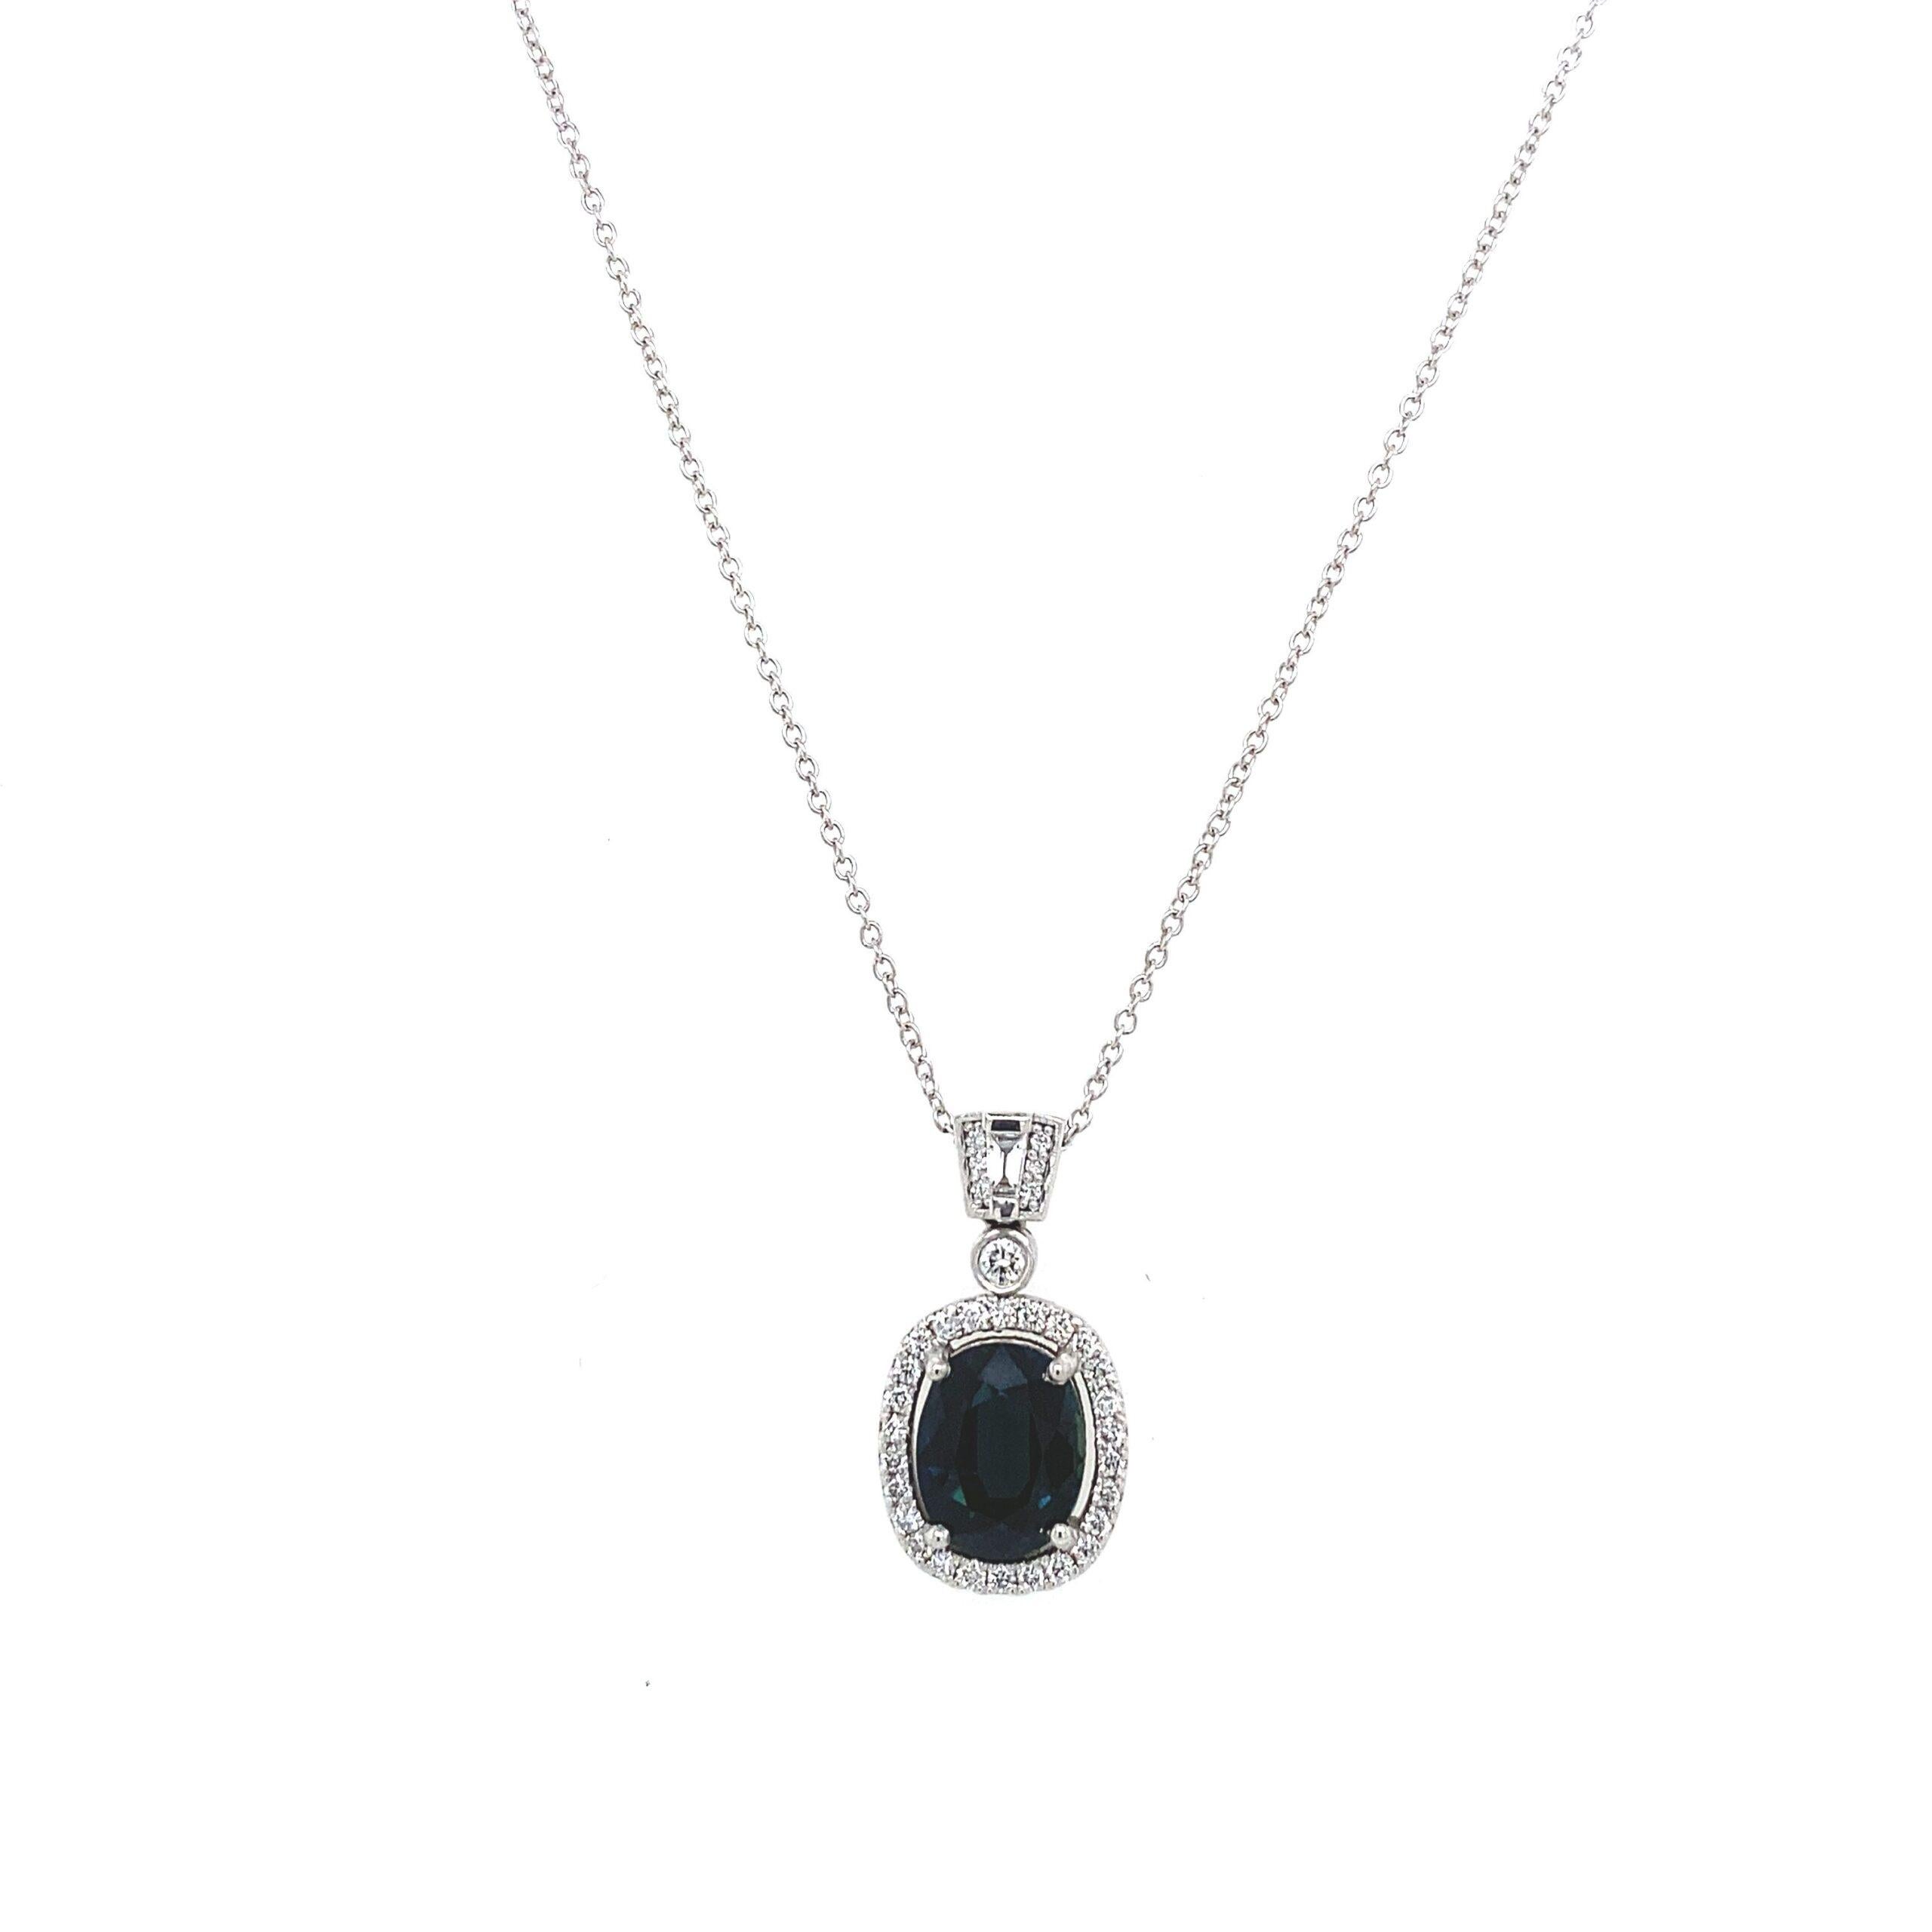 3.36ct Finest Quality Oval Blue Sapphire Pendant, Set with 0.65ct Of Diamonds

Surrounded by 0.65ct Of Rounds Diamonds  & One Tapered Baguette. Suspended on 14'' Platinum Trace Chain.

Additional Information:
Diamond Weight: 0.65ct
Diamond Colour: